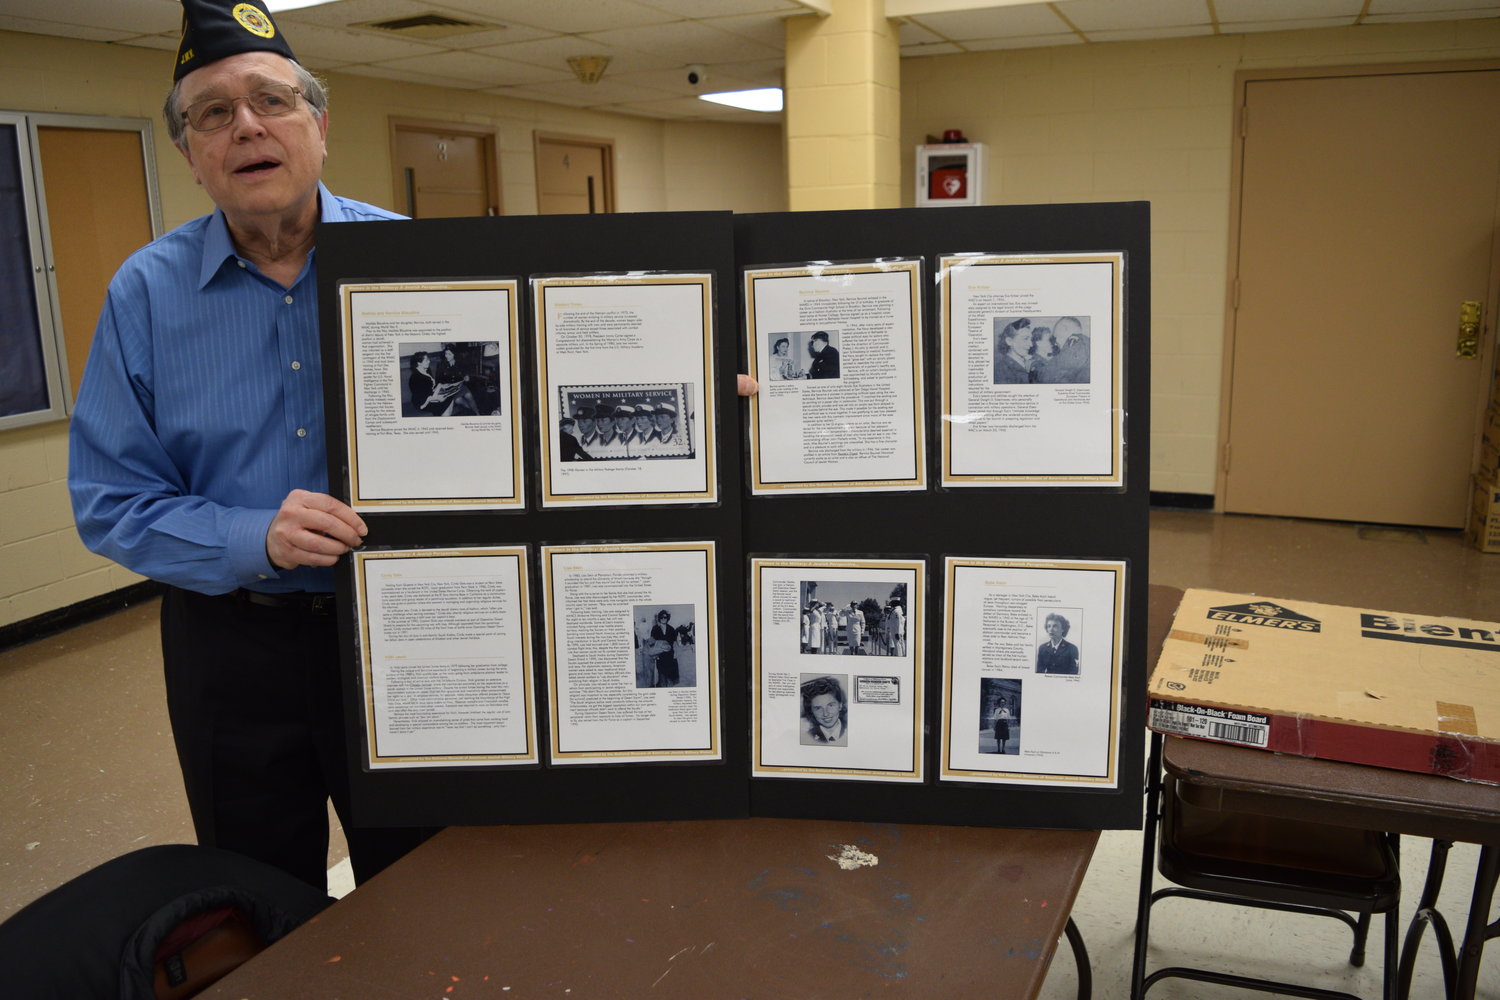 Ed Freeberg, a U.S. Air Force veteran, displays posters from the "Women in the Military" collection  honoring those Jewish women who served in the U.S. Armed forces.